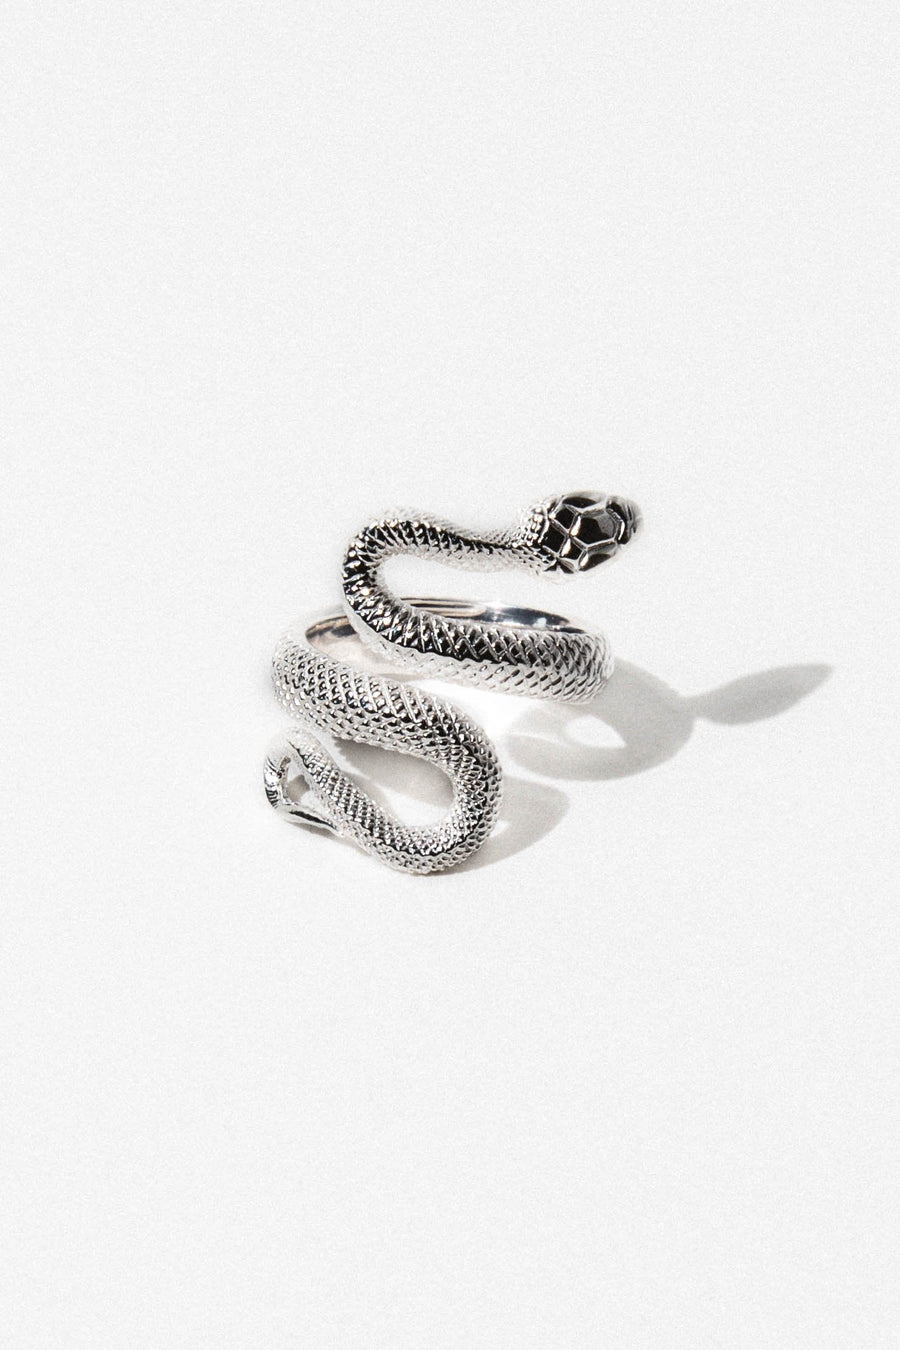 Temple of the Sun Jewelry Silver / US 7 Serpent Ring